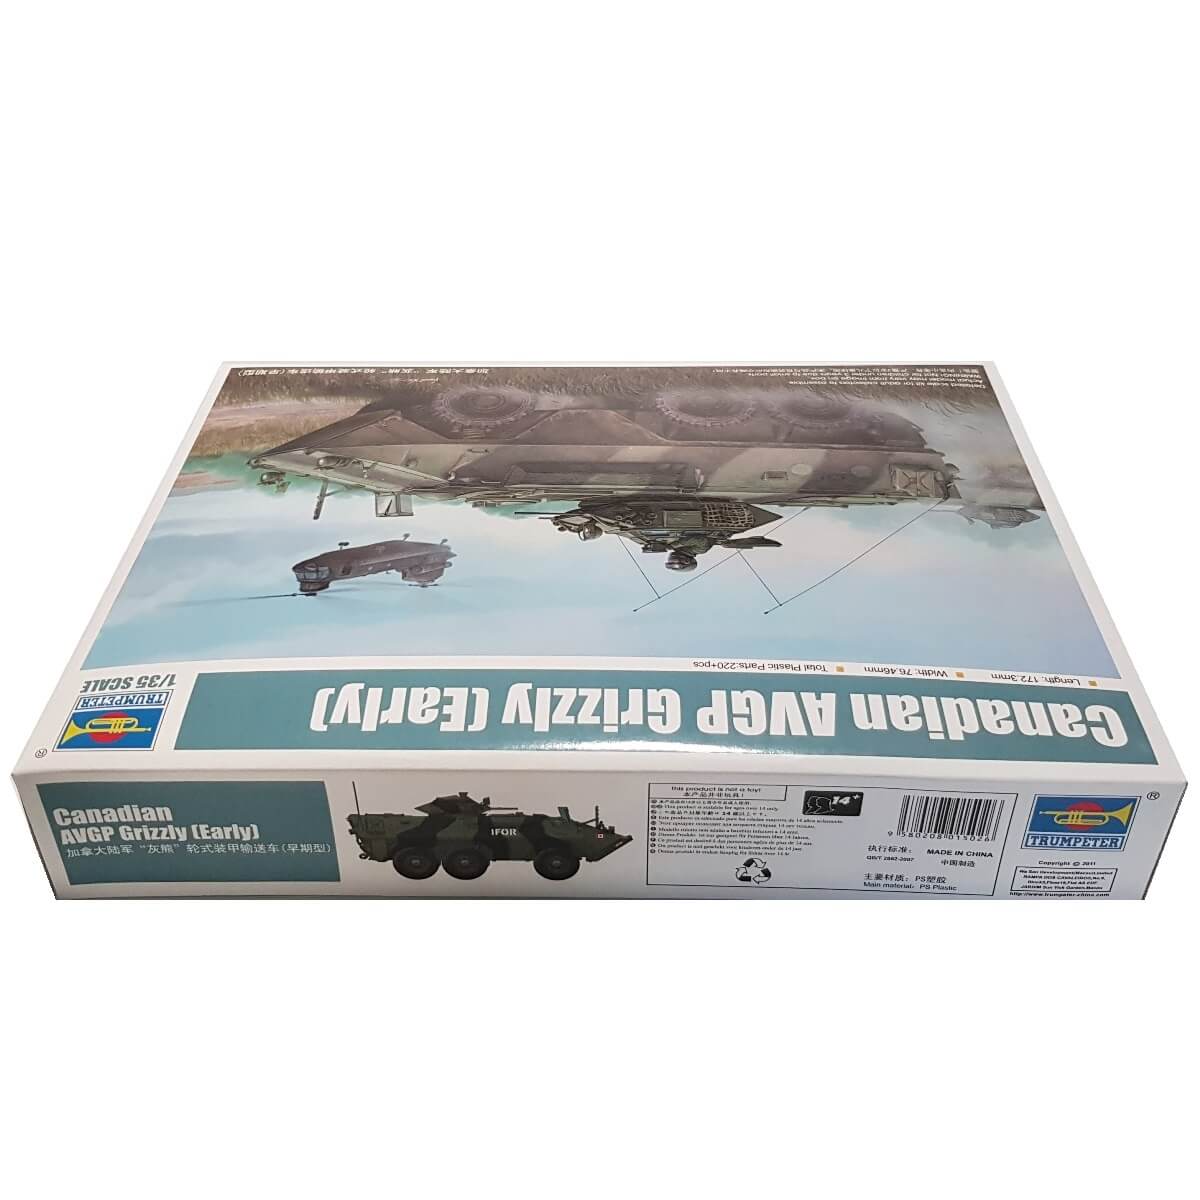 1:35 Canadian AVGP Grizzly - Early - TRUMPETER